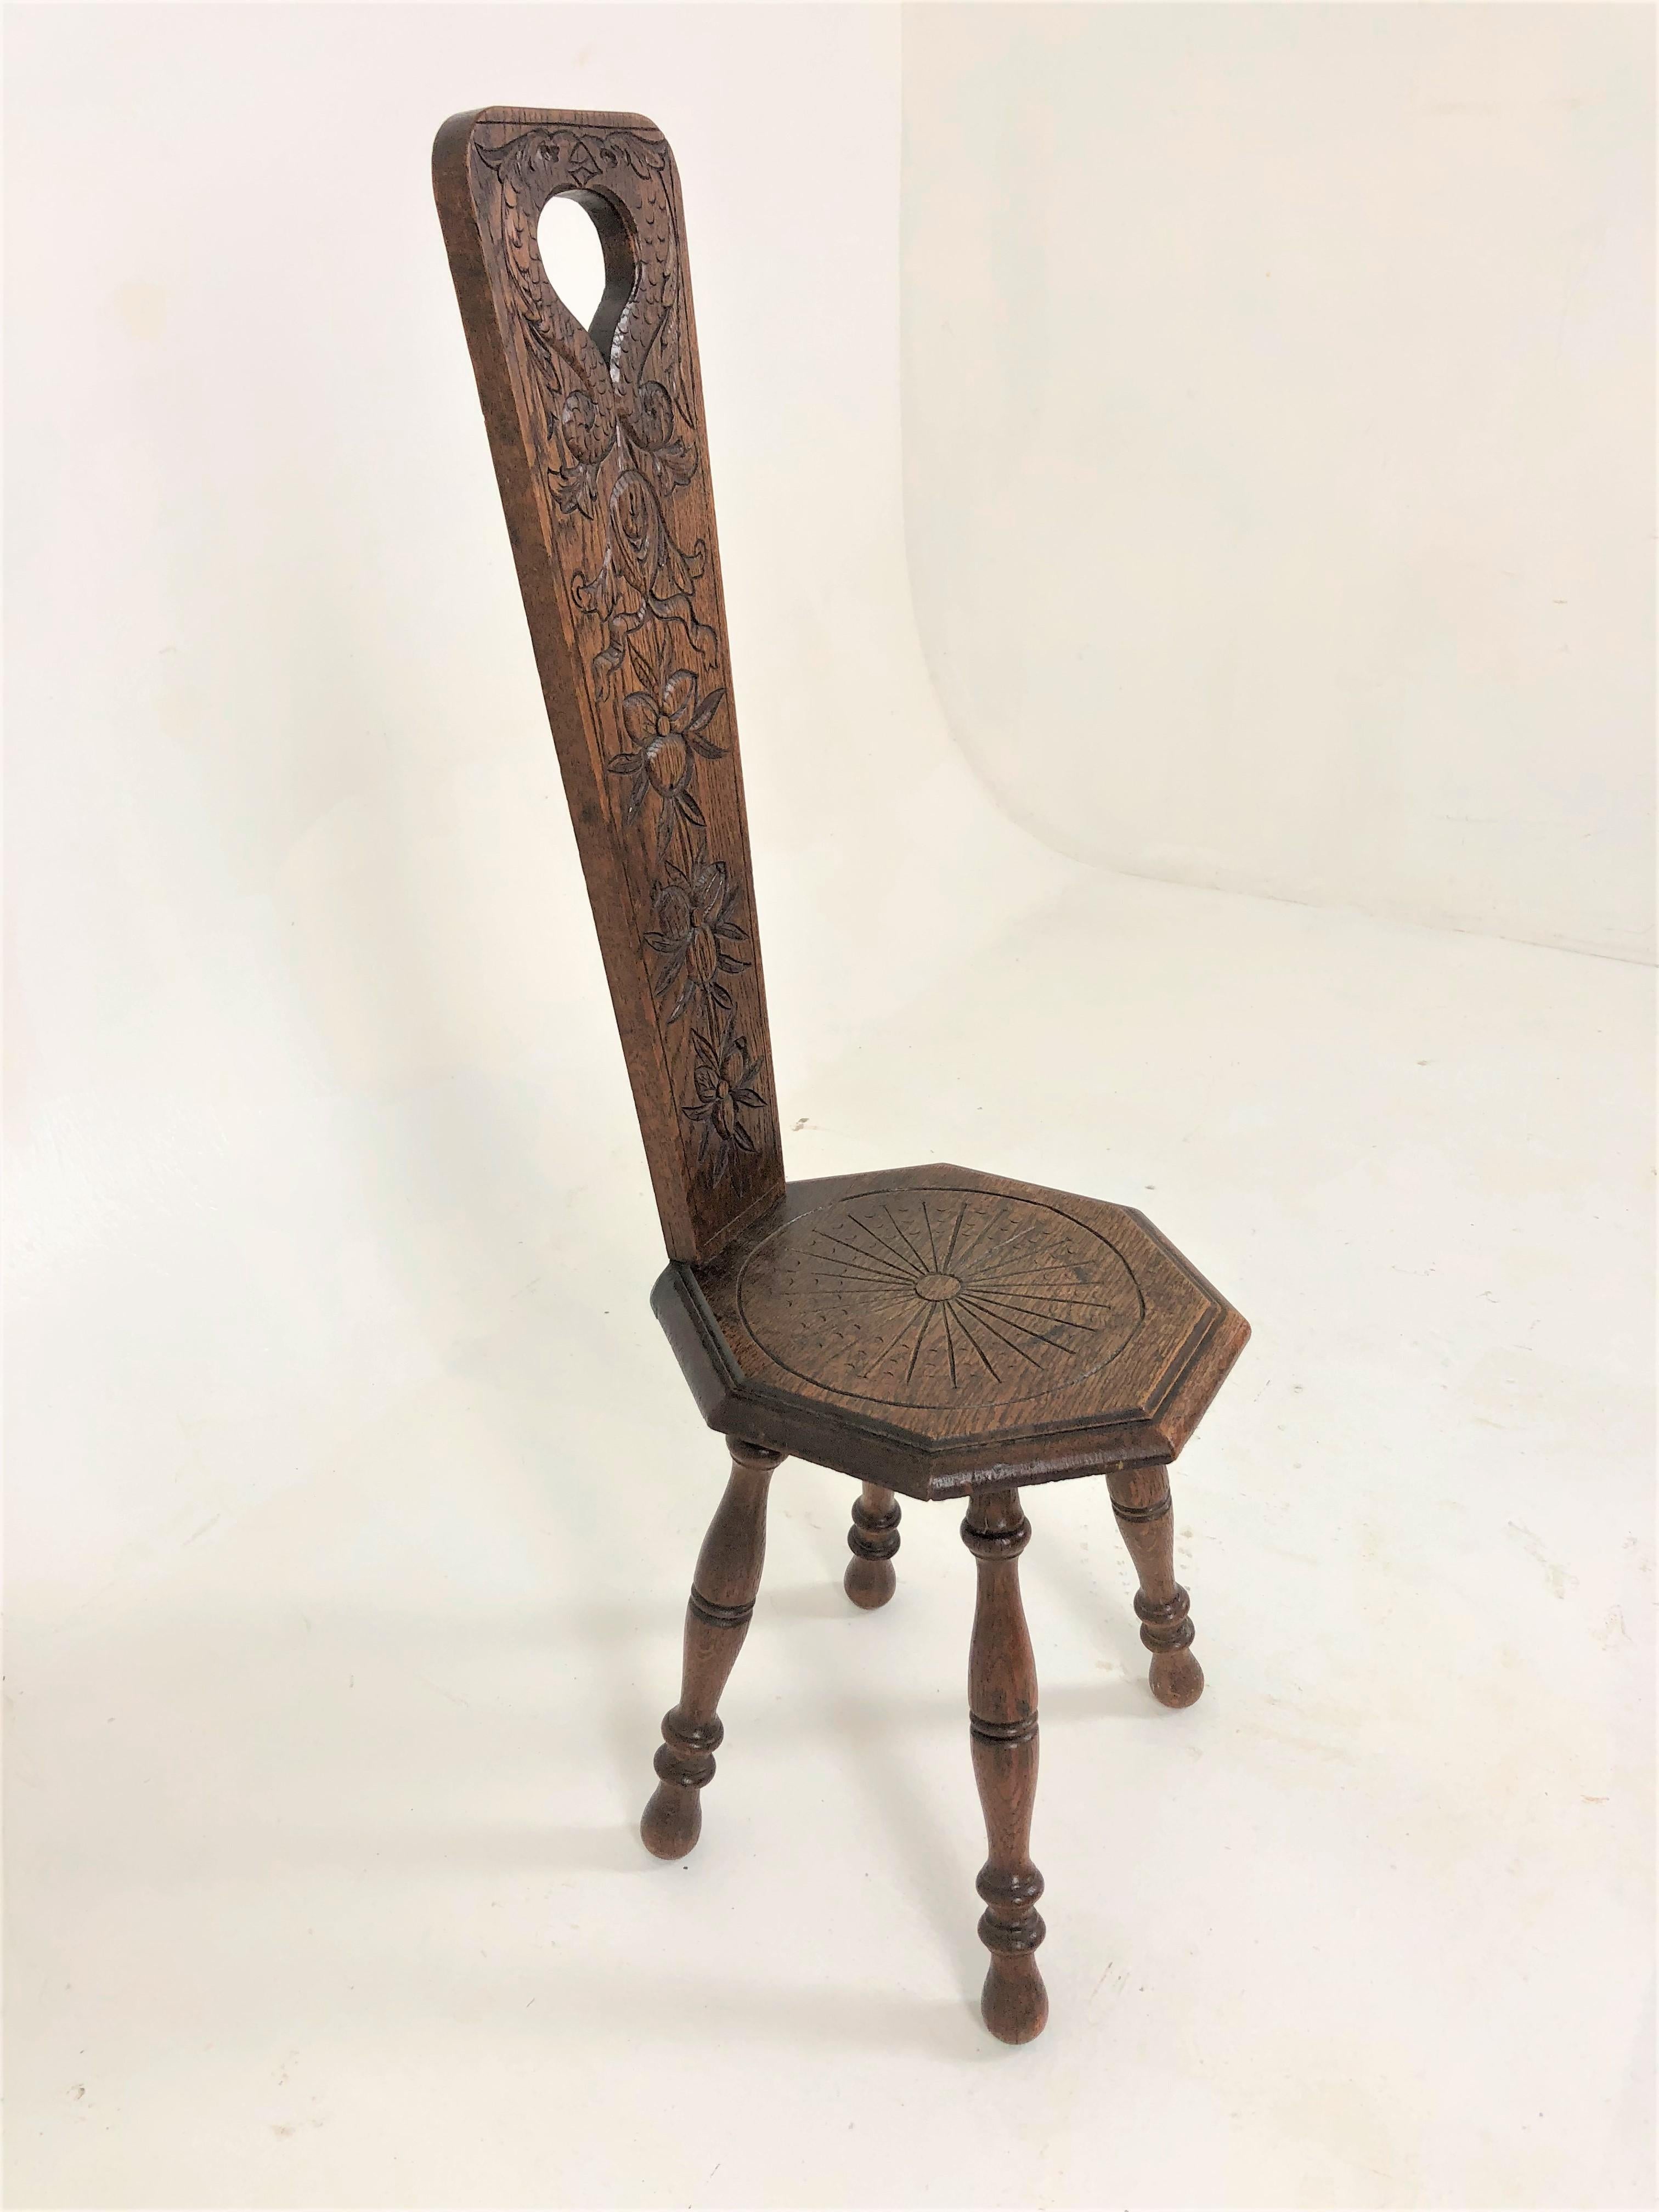 Antique Carved Oak spinning chair, Plant stand, Scotland 1890, H711

Scotland 1890
Solid Oak
Original finish
Carved Shaped back with hand painted floral design
Tall Carved floral back with a pierced handle
Carved Octagonal seat
Raised on four turned